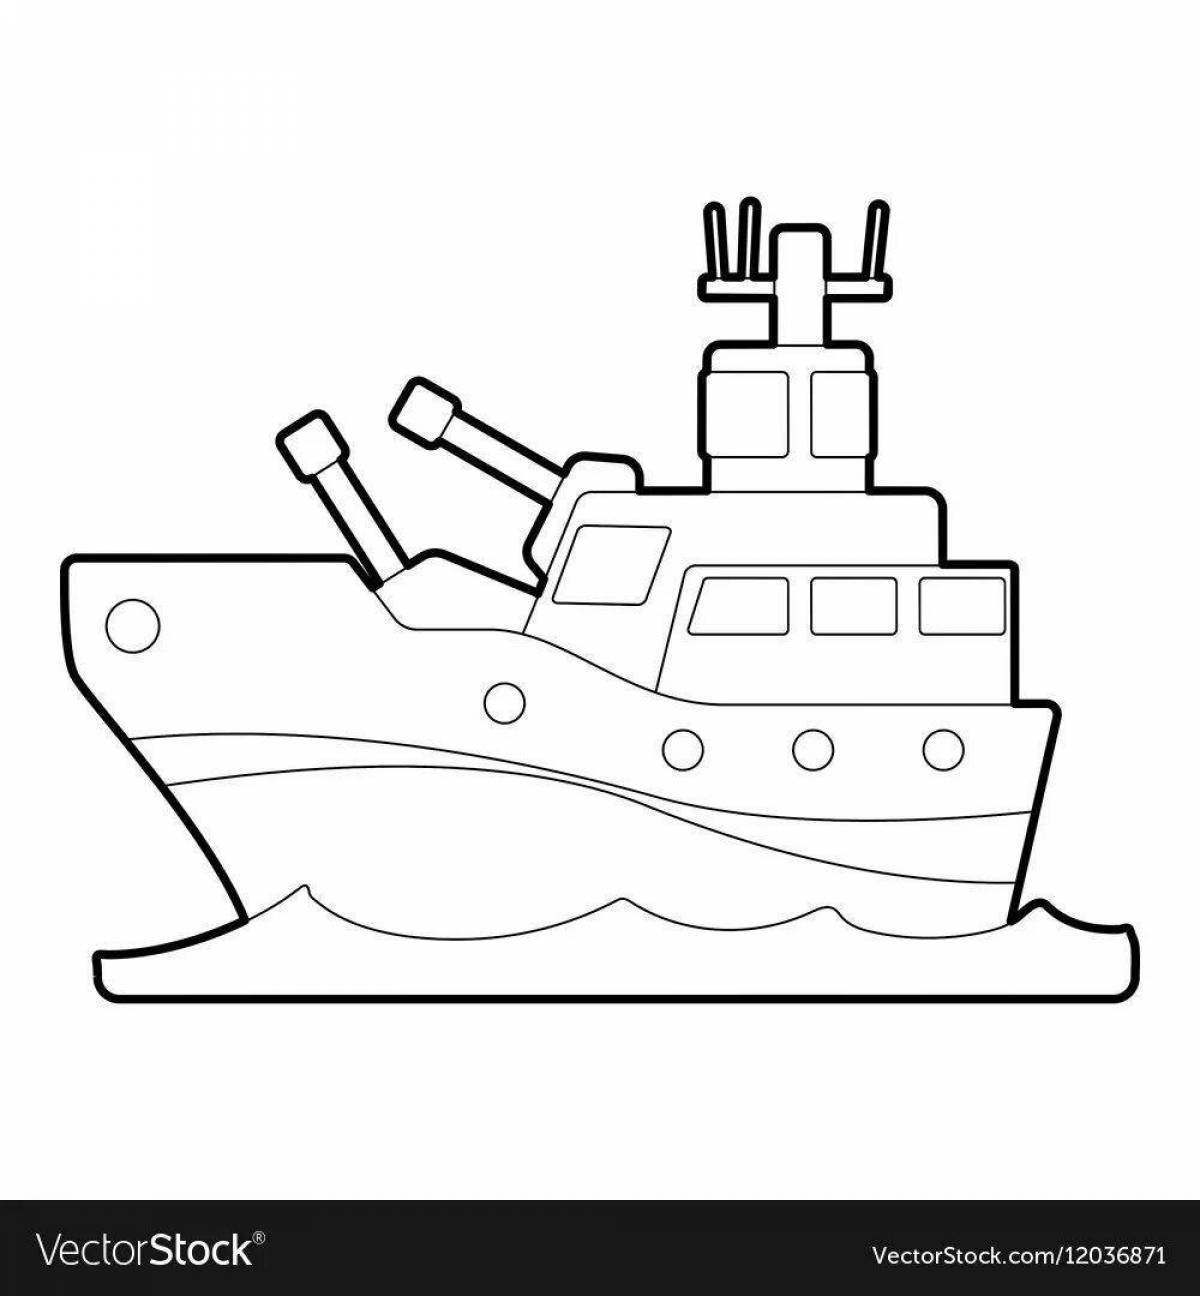 Animated aircraft coloring page